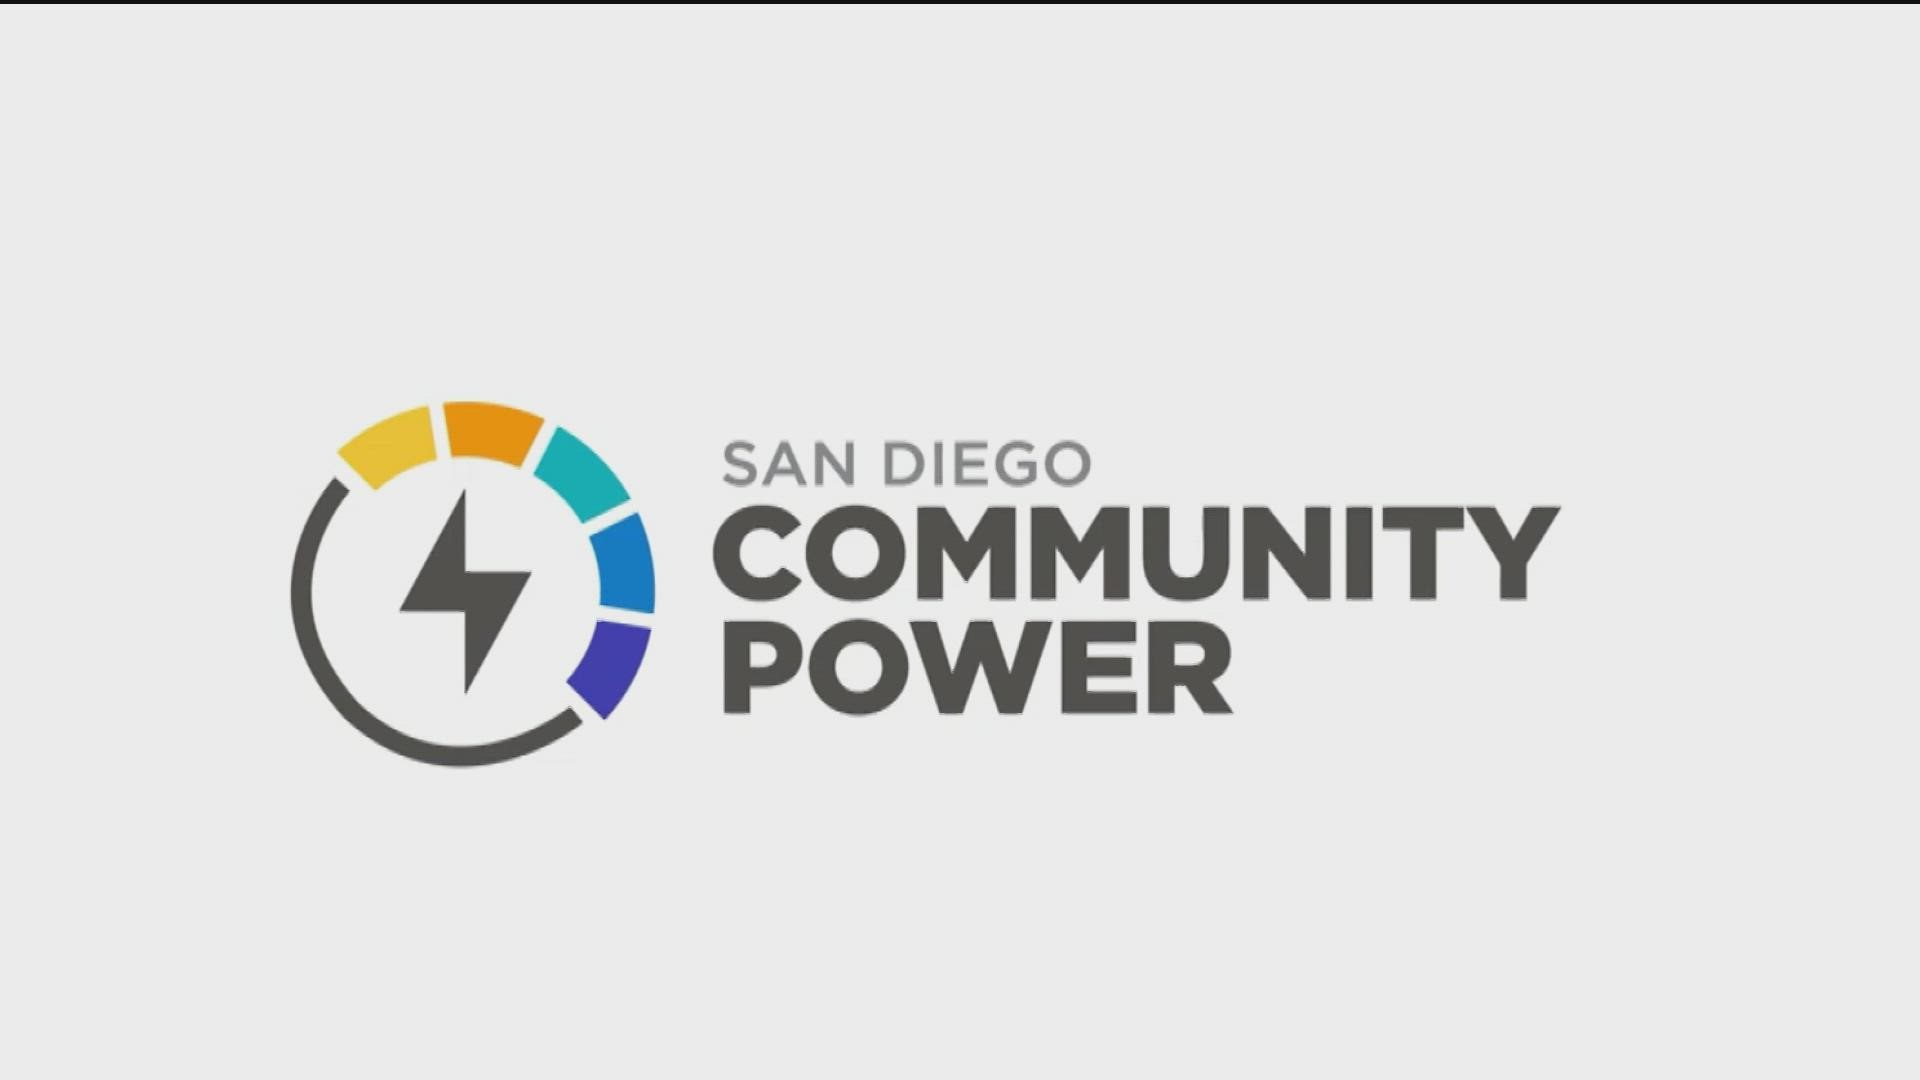 Chula Vista and San Diego are among local cities switching over to the energy provider.